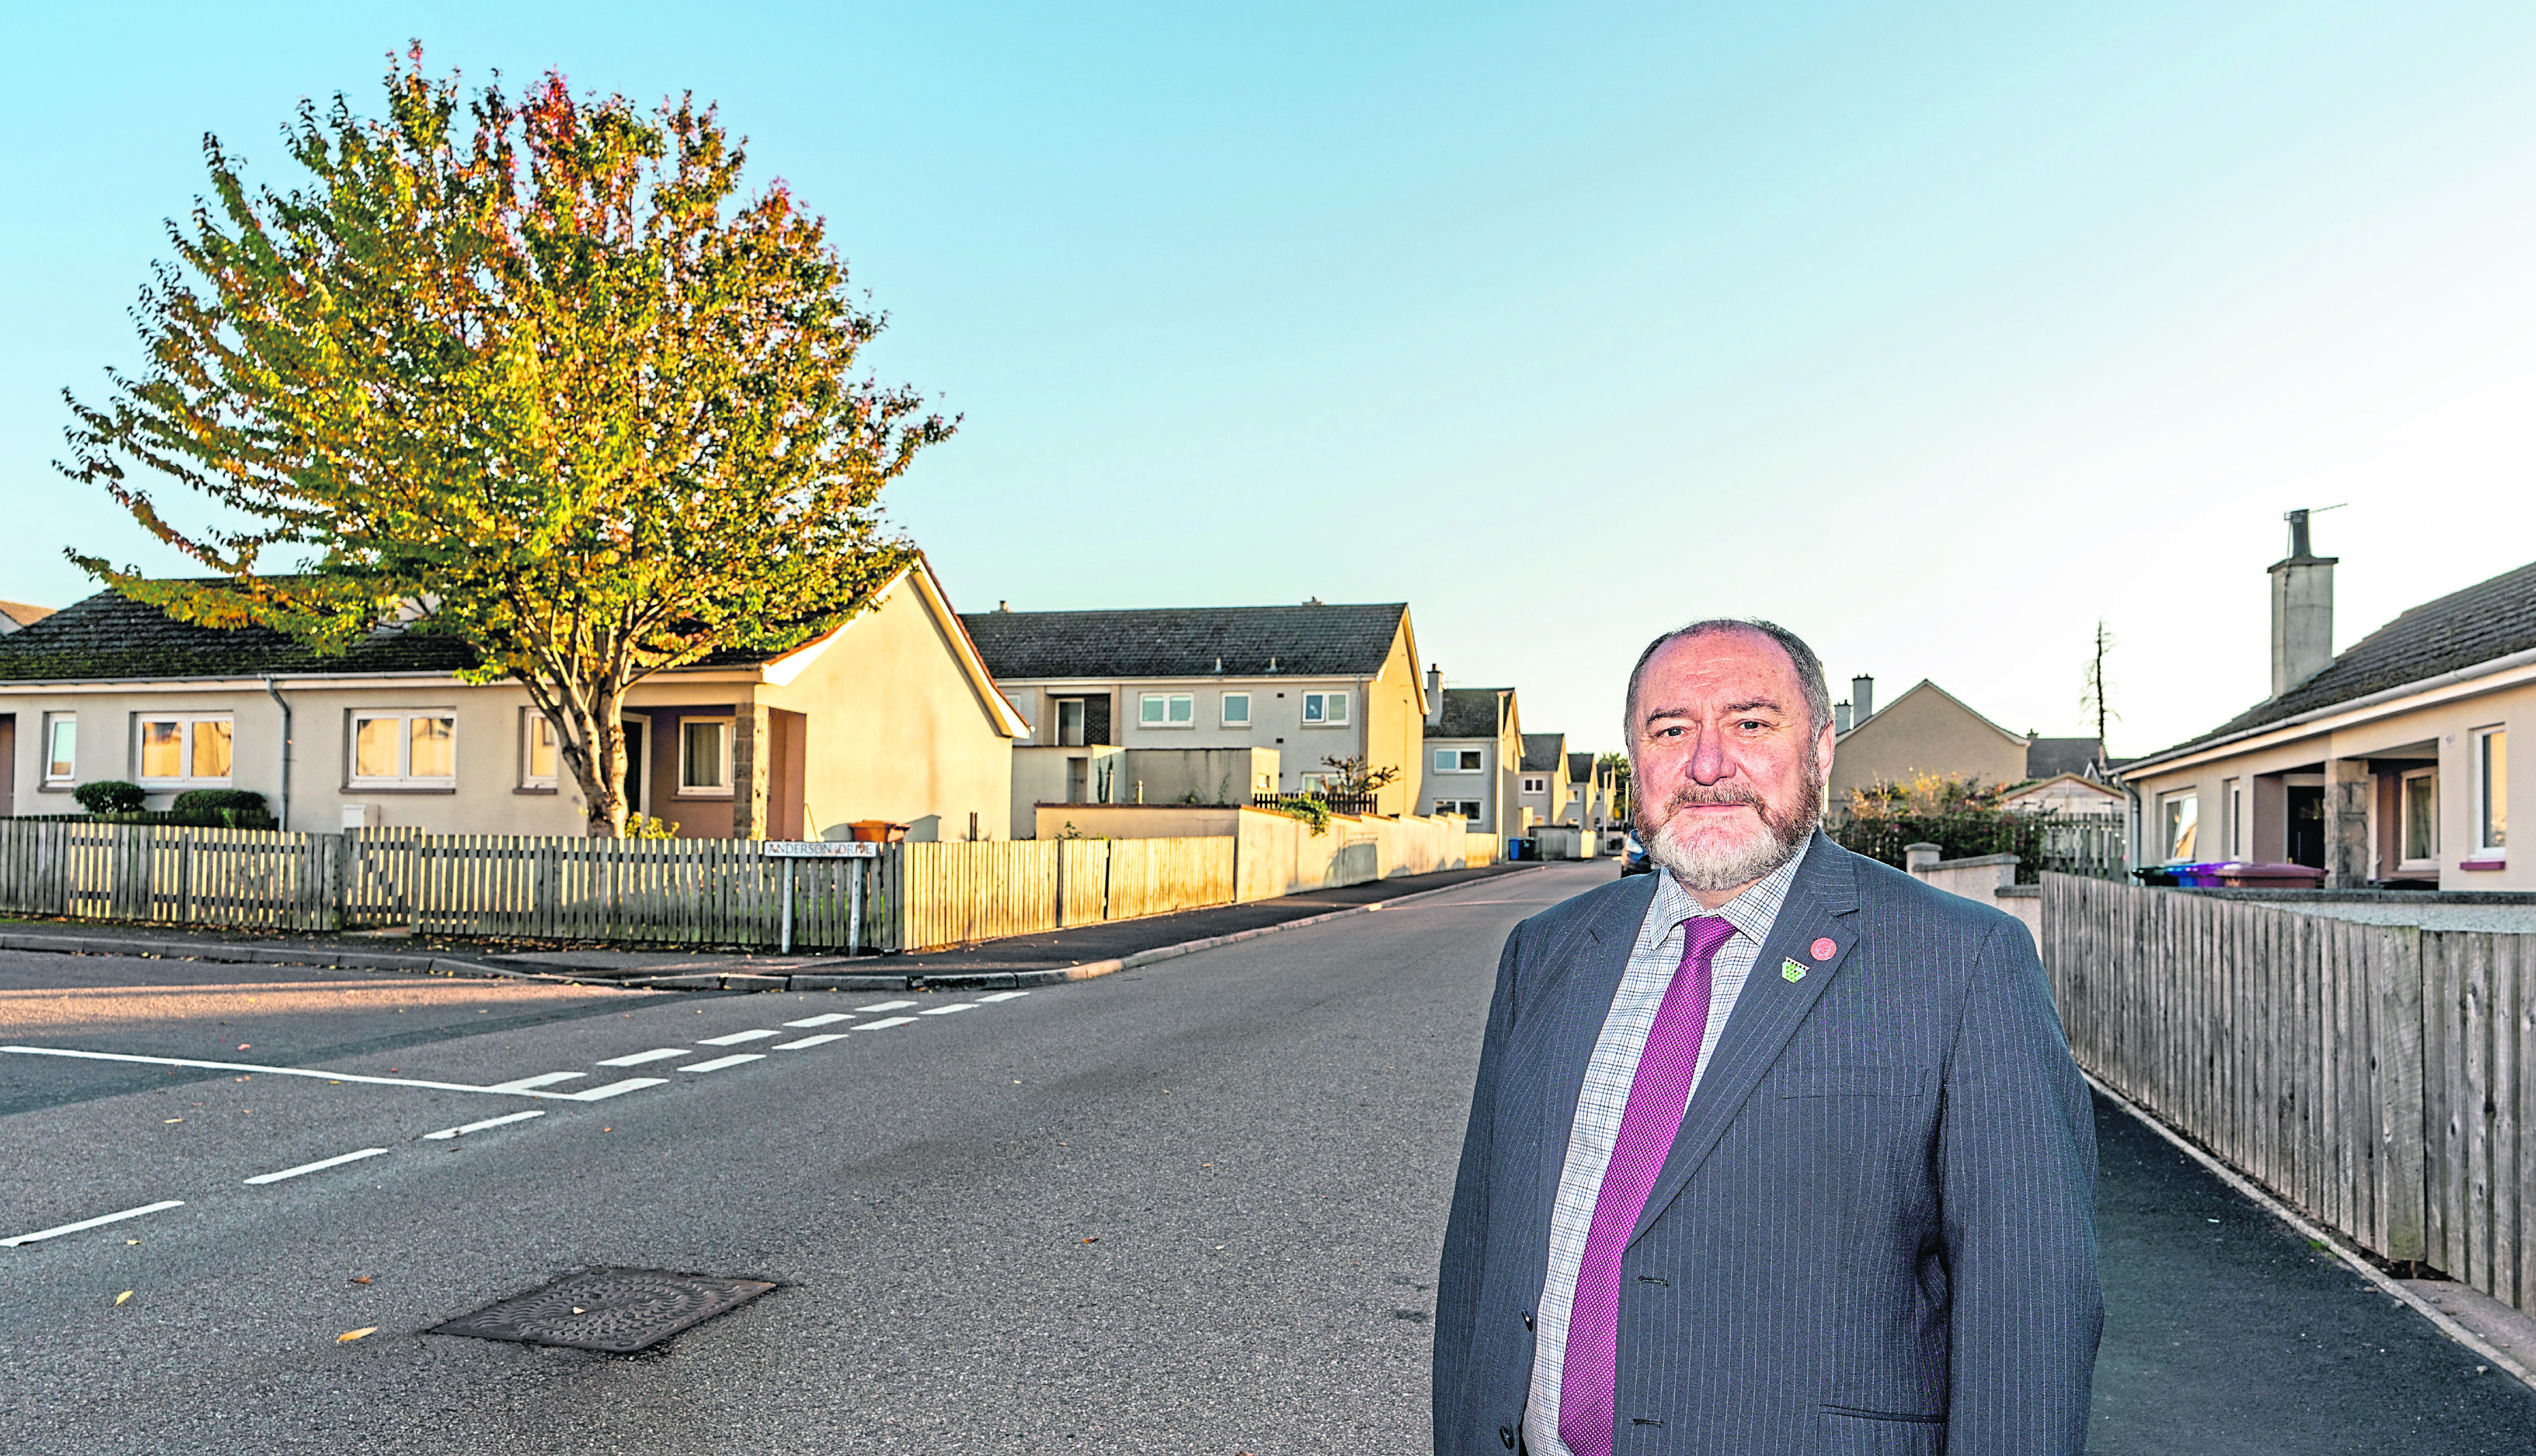 Councillor John Divers on Bezack Street at Anderson Drive, Elgin, Moray, where nails and tacks are being scattered on the carriageway.